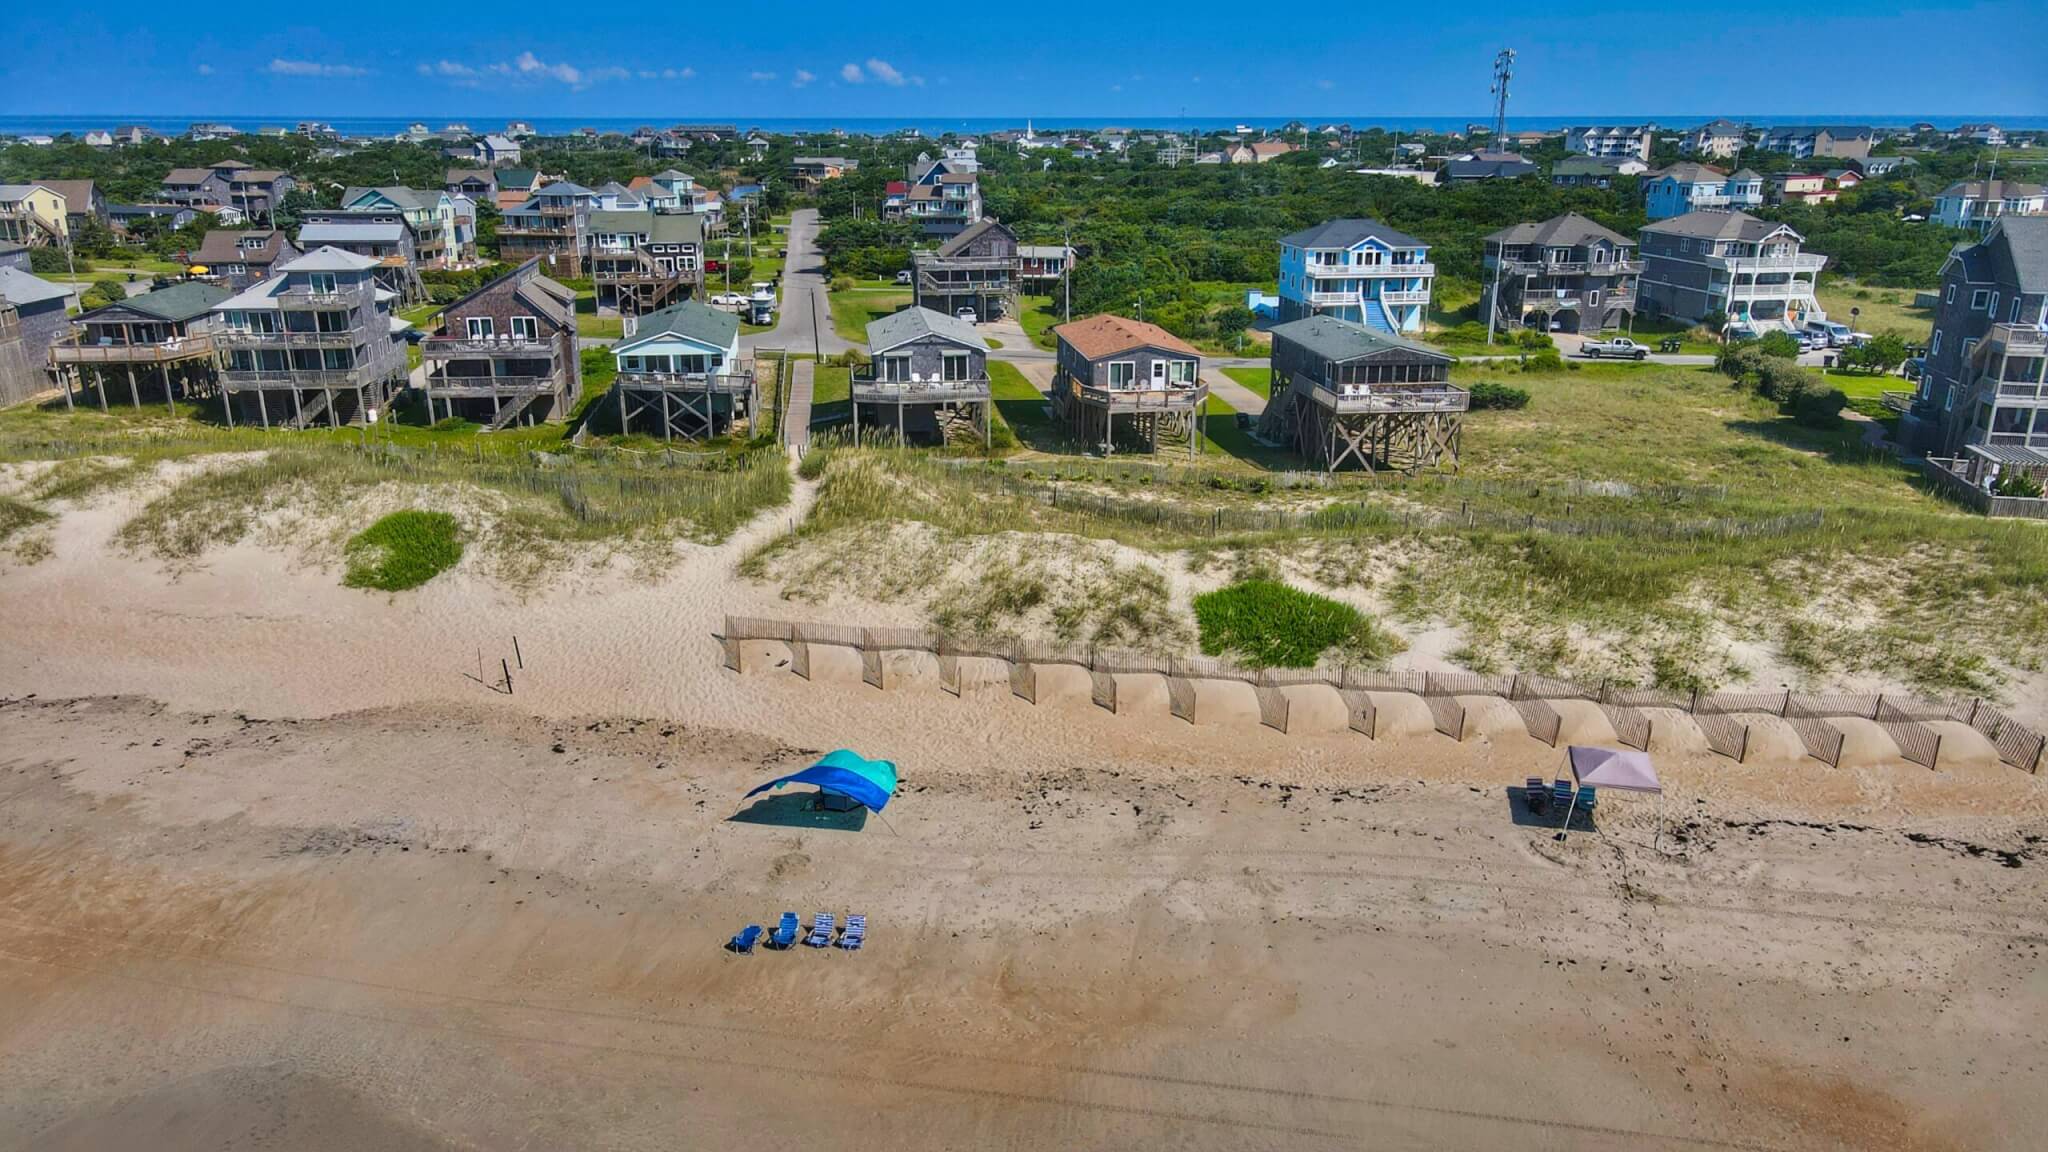 Bird's eye view of the beach on Hatteras Island facing the Atlantic Ocean on the Outer Banks of North Carolina.